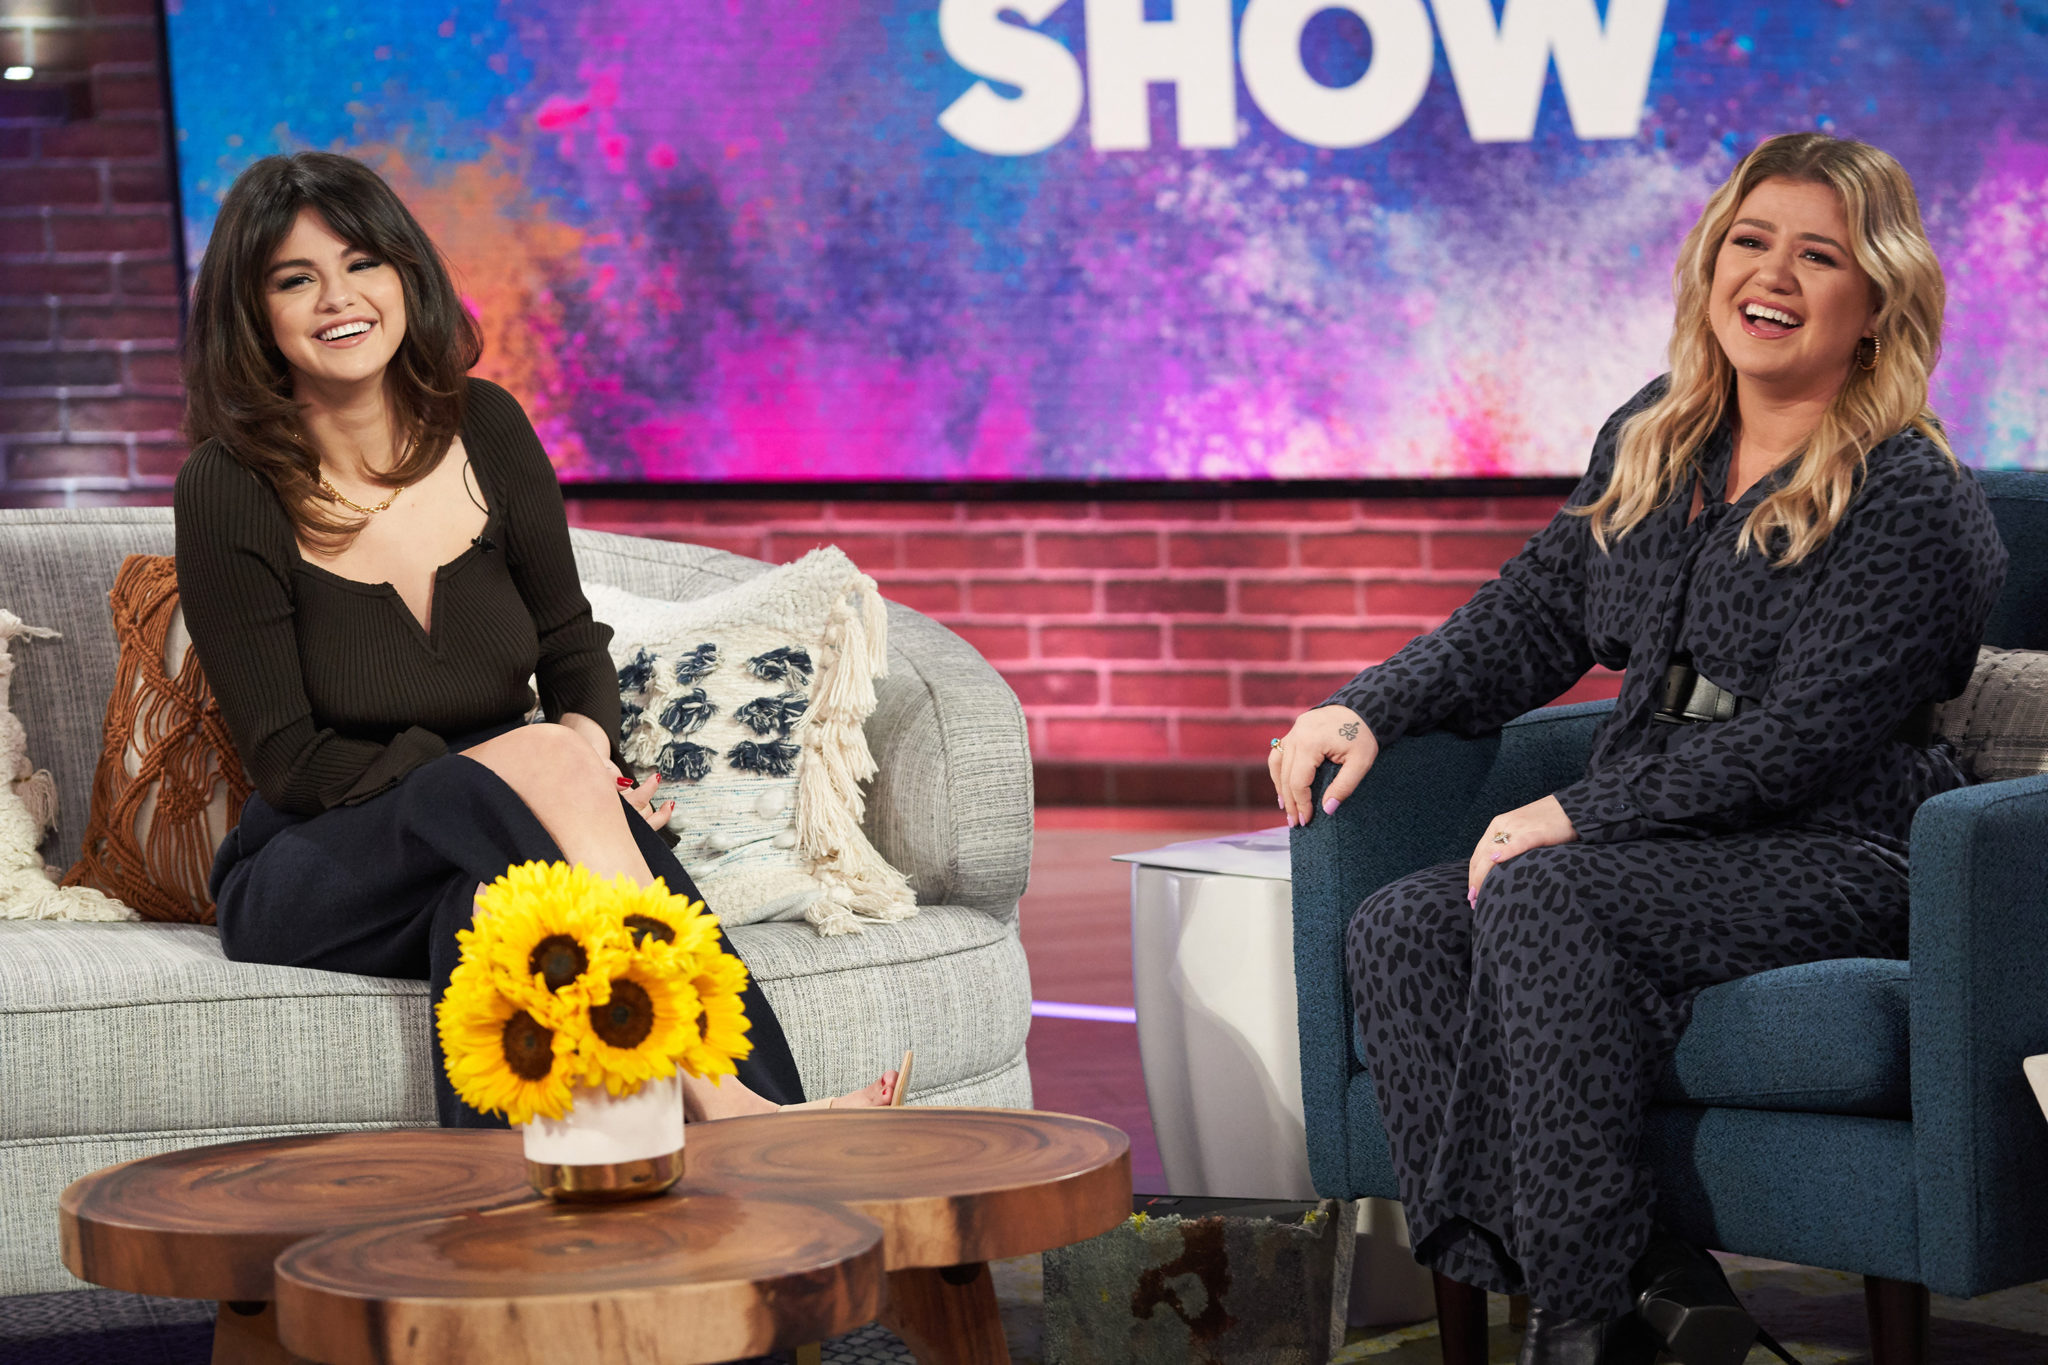 The Kelly Clarkson Show Talk Show to Produce Weekly Episodes from